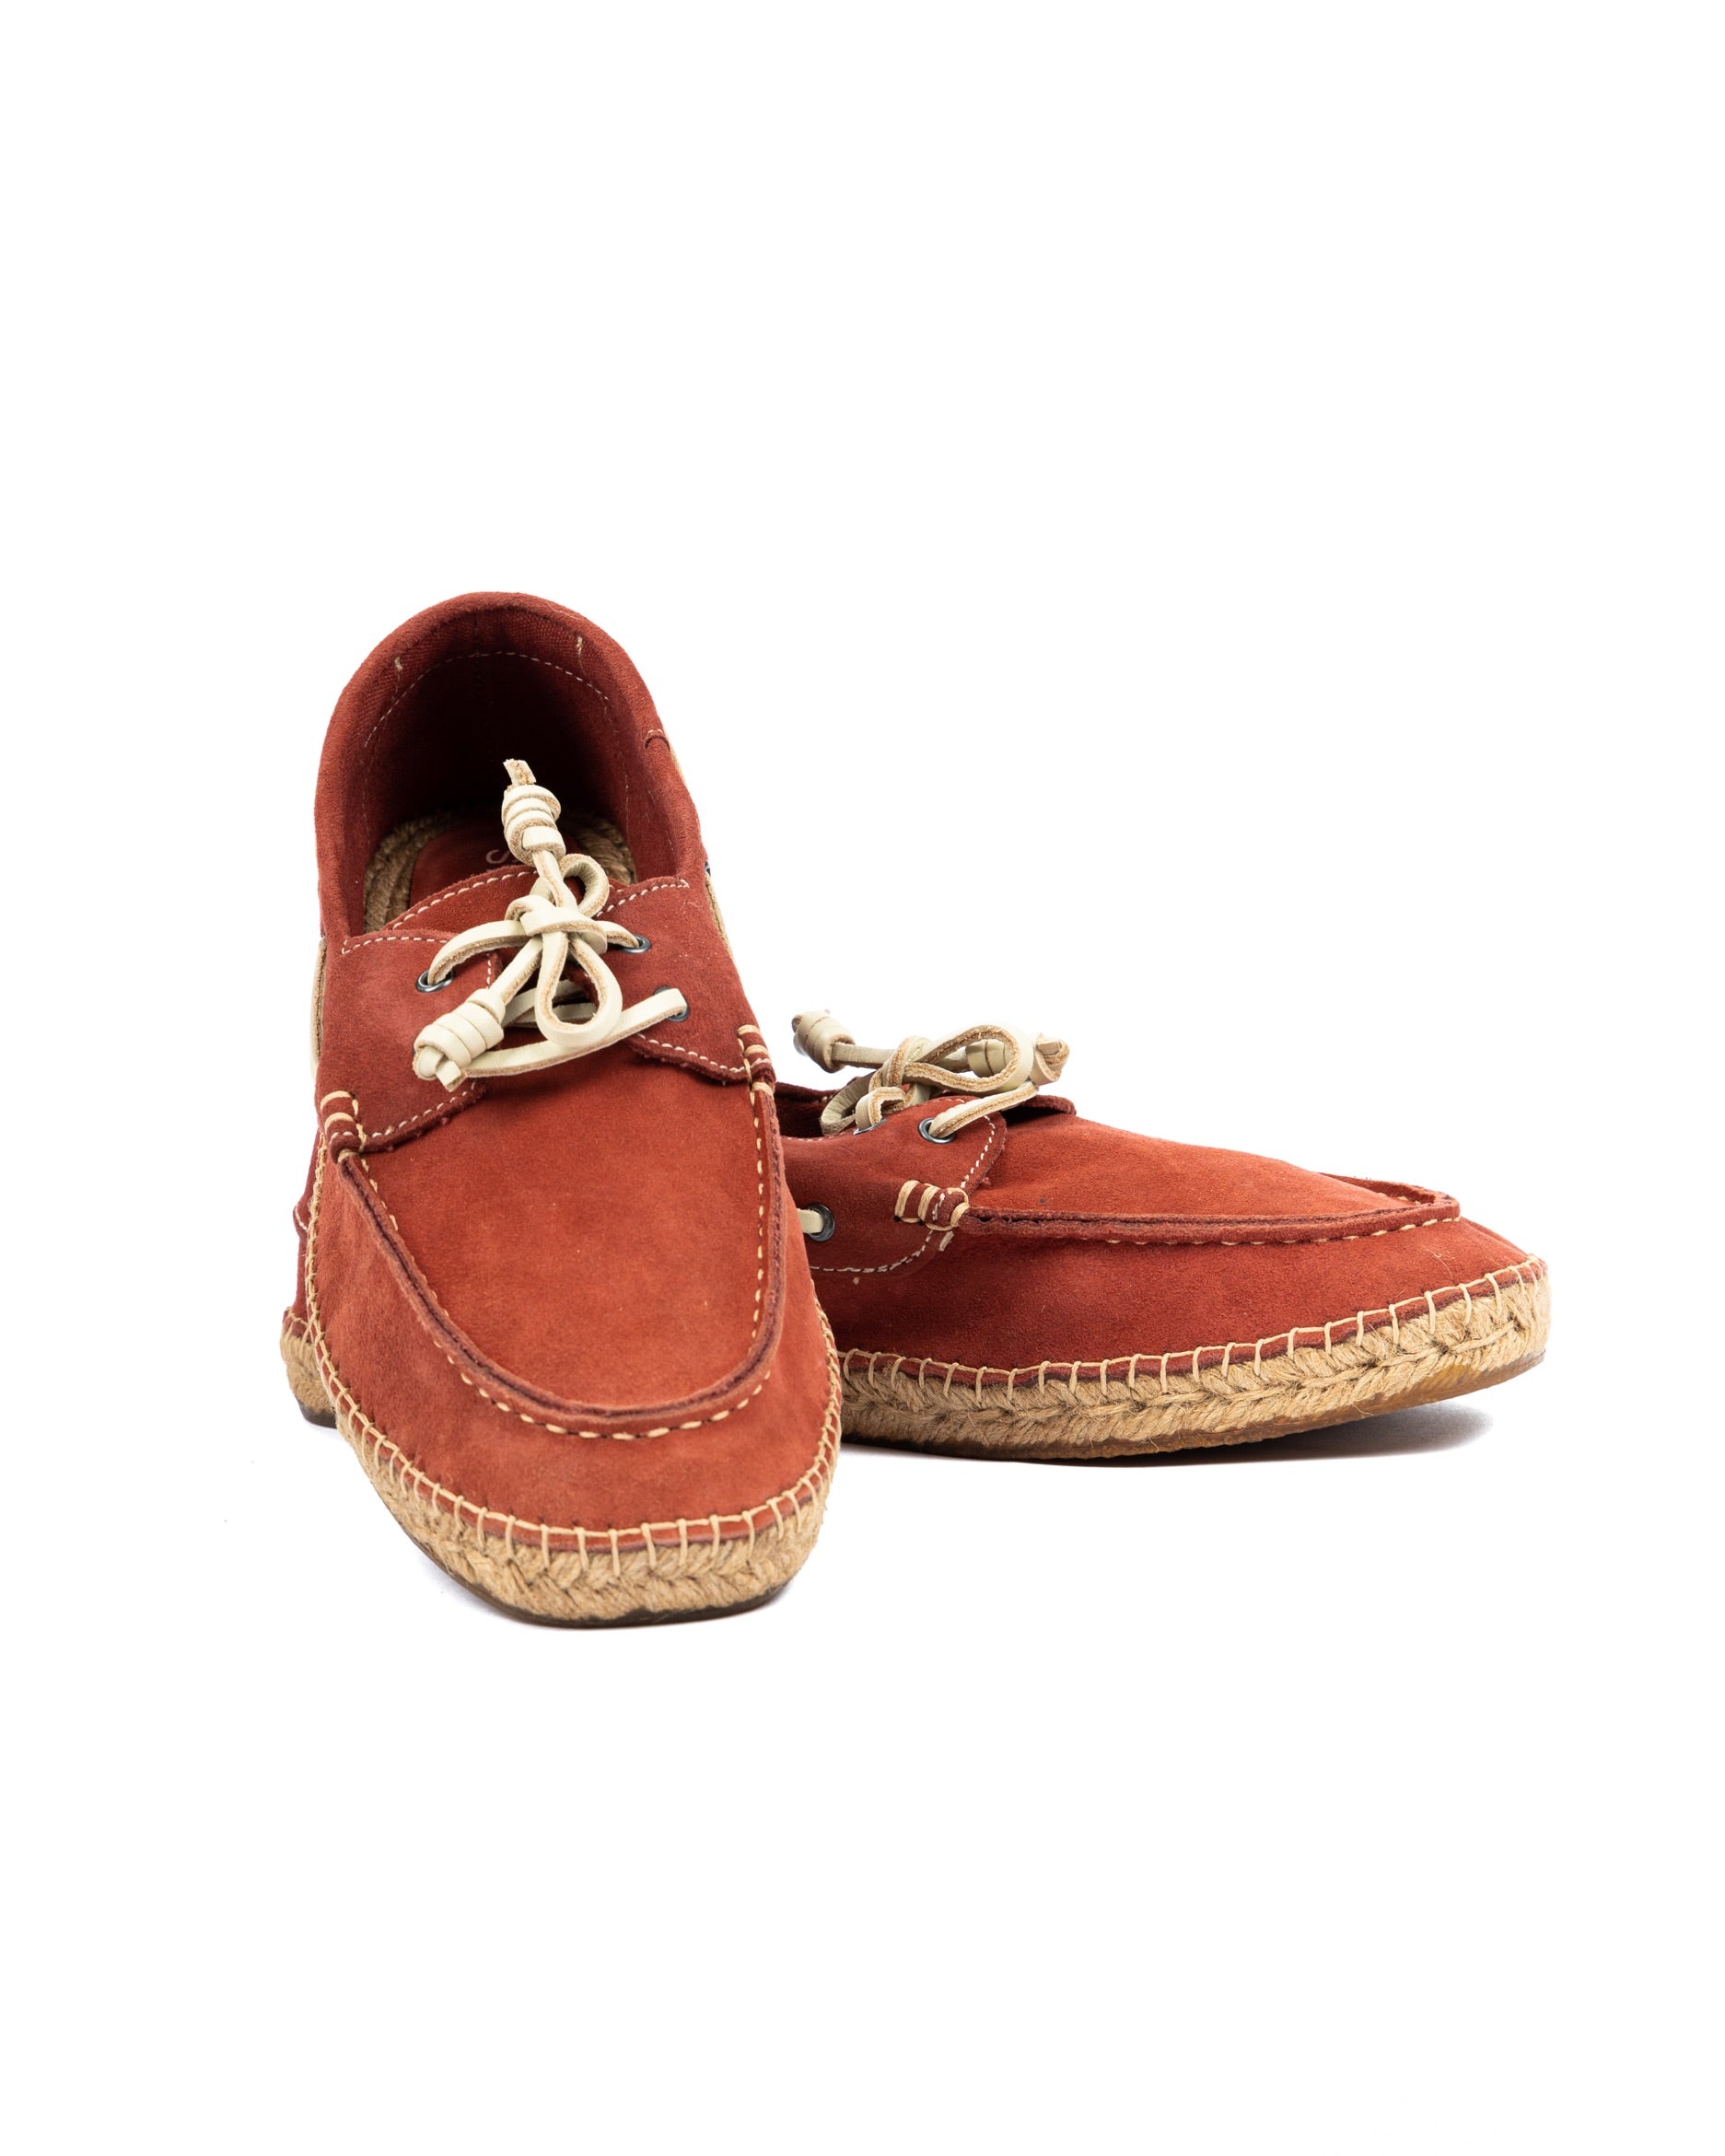 Pompeii - burgundy suede boat with rope bottom